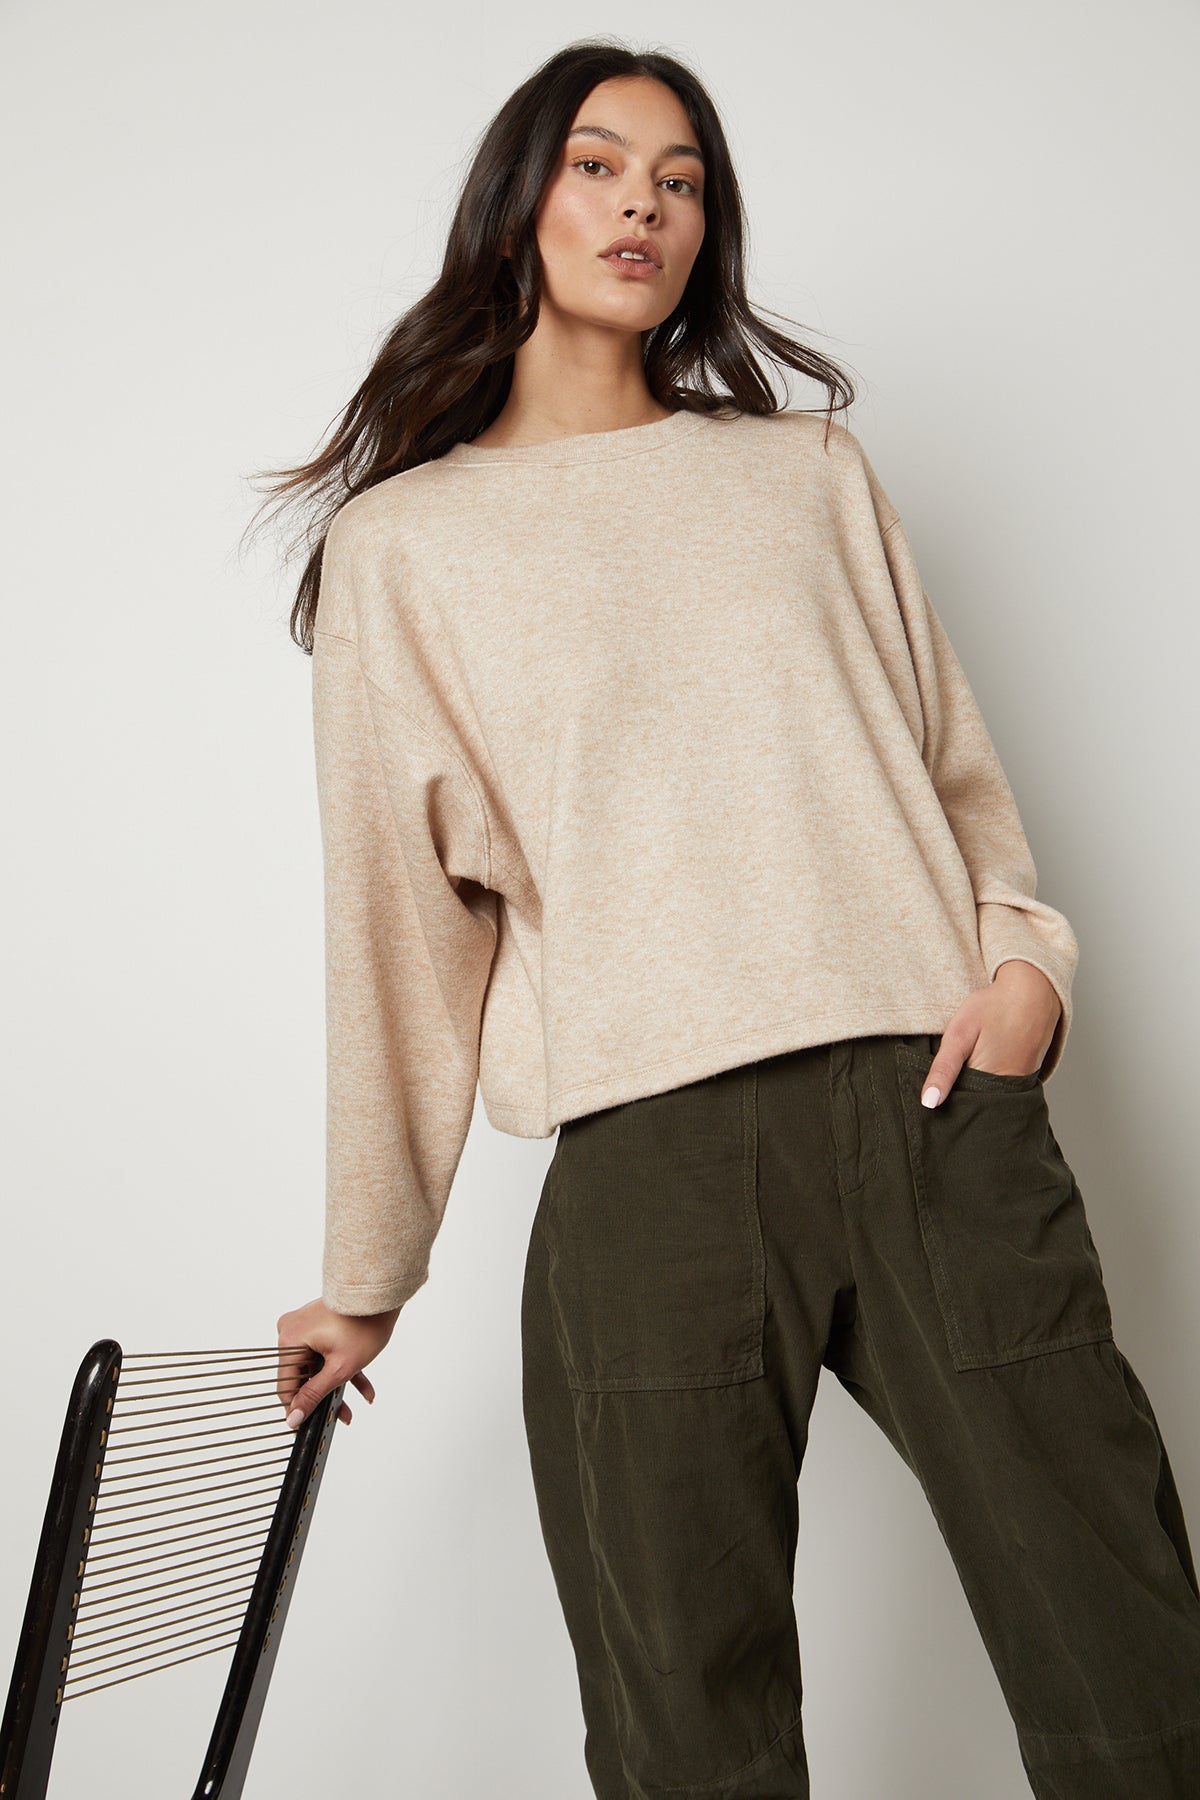 The model is wearing an oversized NIA DOUBLE KNIT CROPPED CREW sweater by Velvet by Graham & Spencer and olive trousers, combining comfort and style.-35503558852801